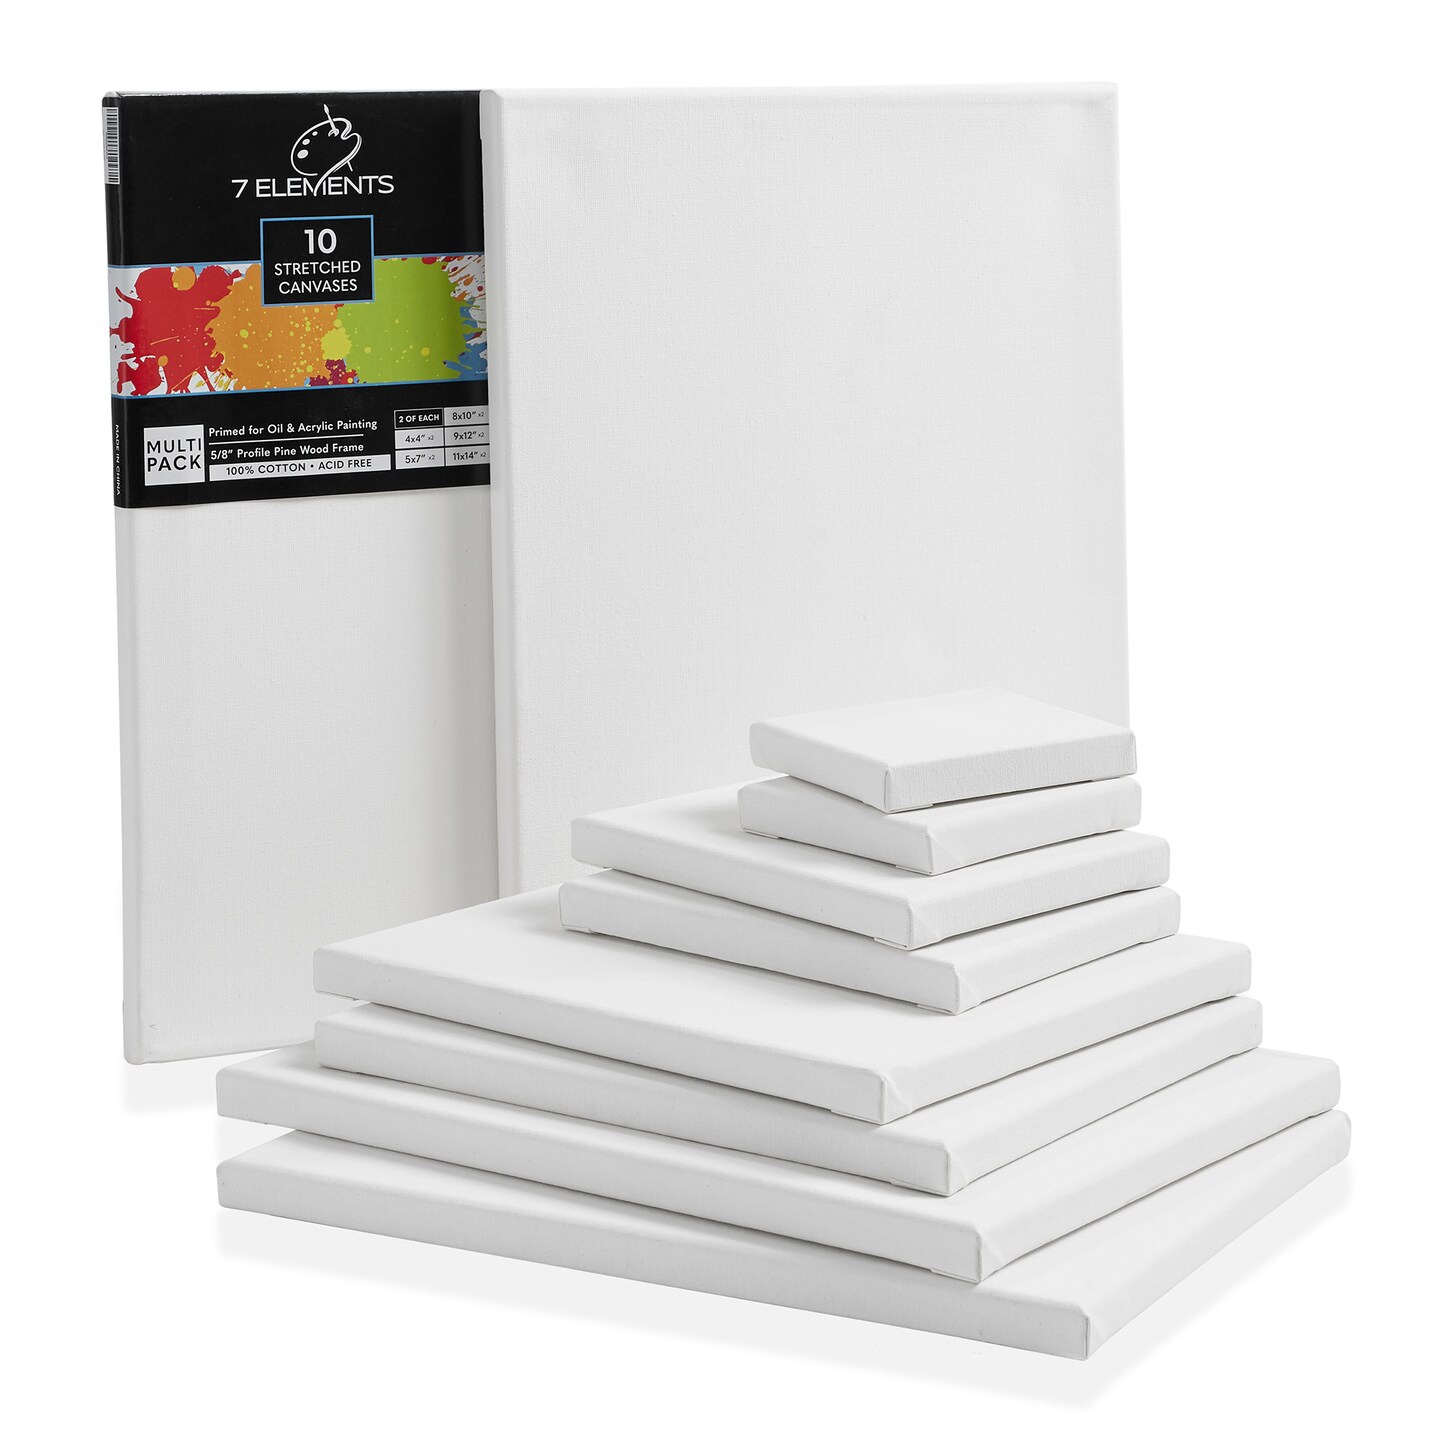 8x10 Inch Stretched Canvas, 10 Pack 100% Cotton Professional Blank Canvas,  Canvases for Painting Using Acrylic Paint or Oil (Pre-Primed)